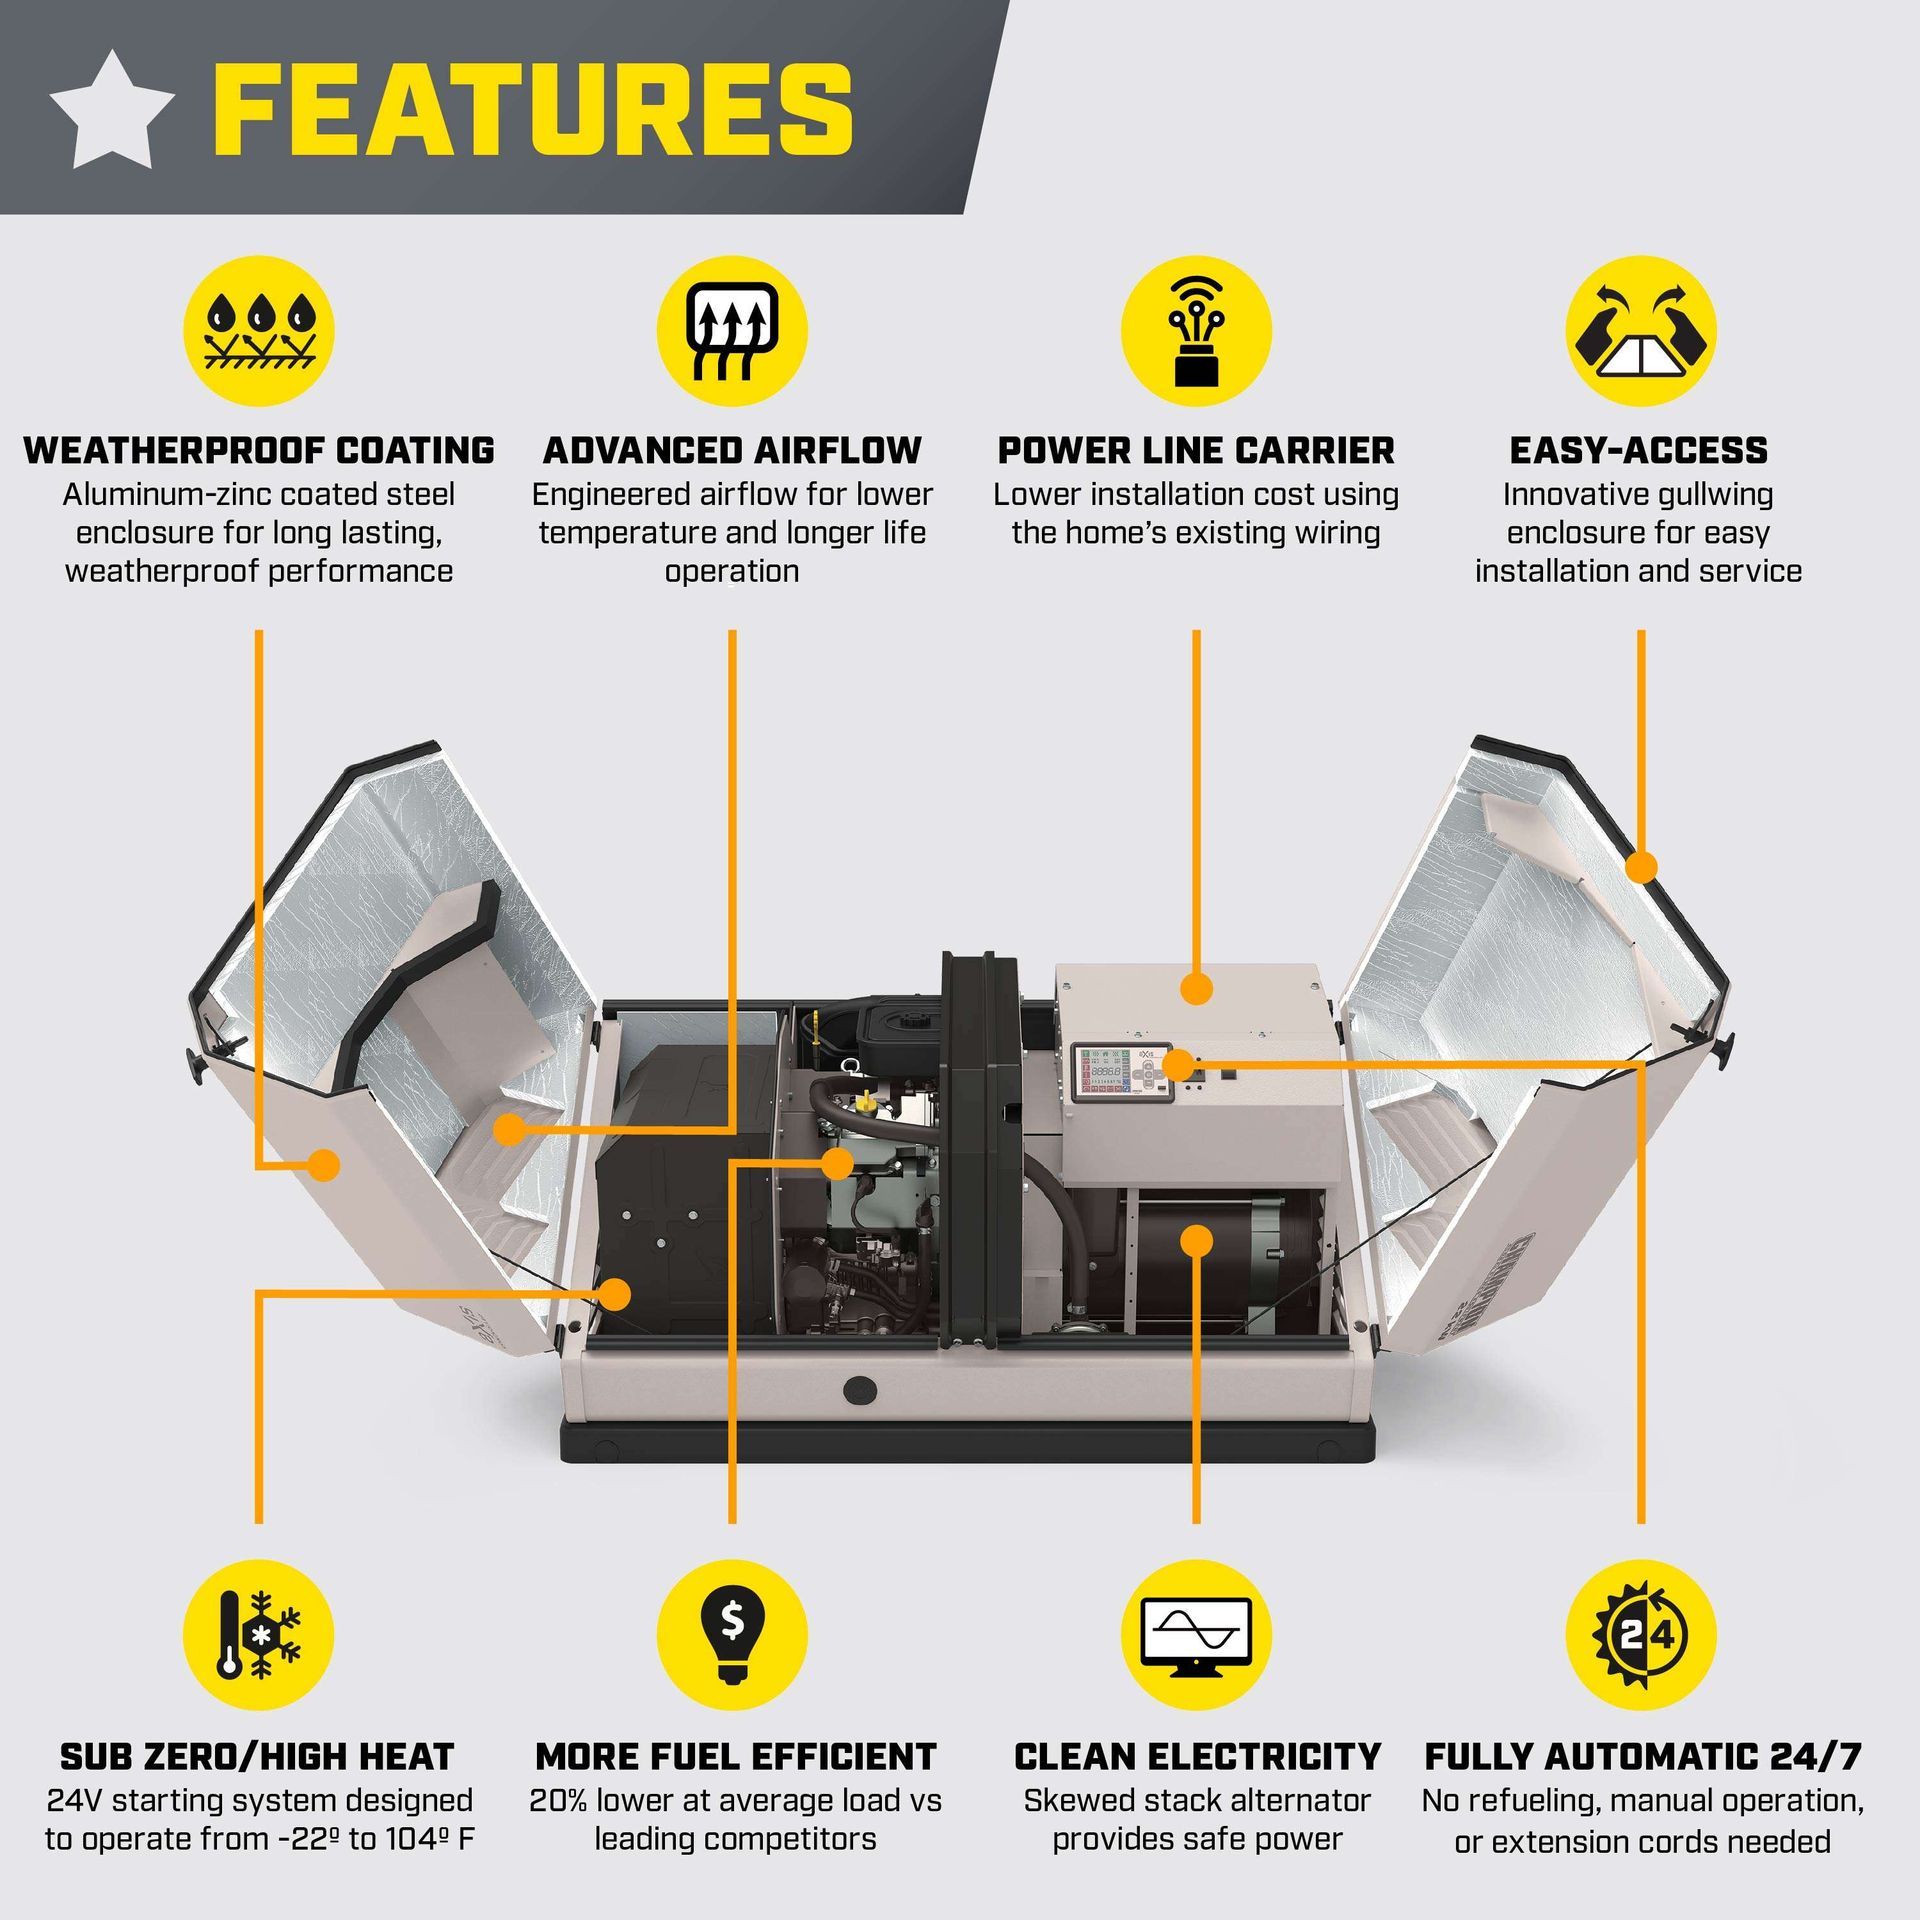 Key Features of the Champion Genset